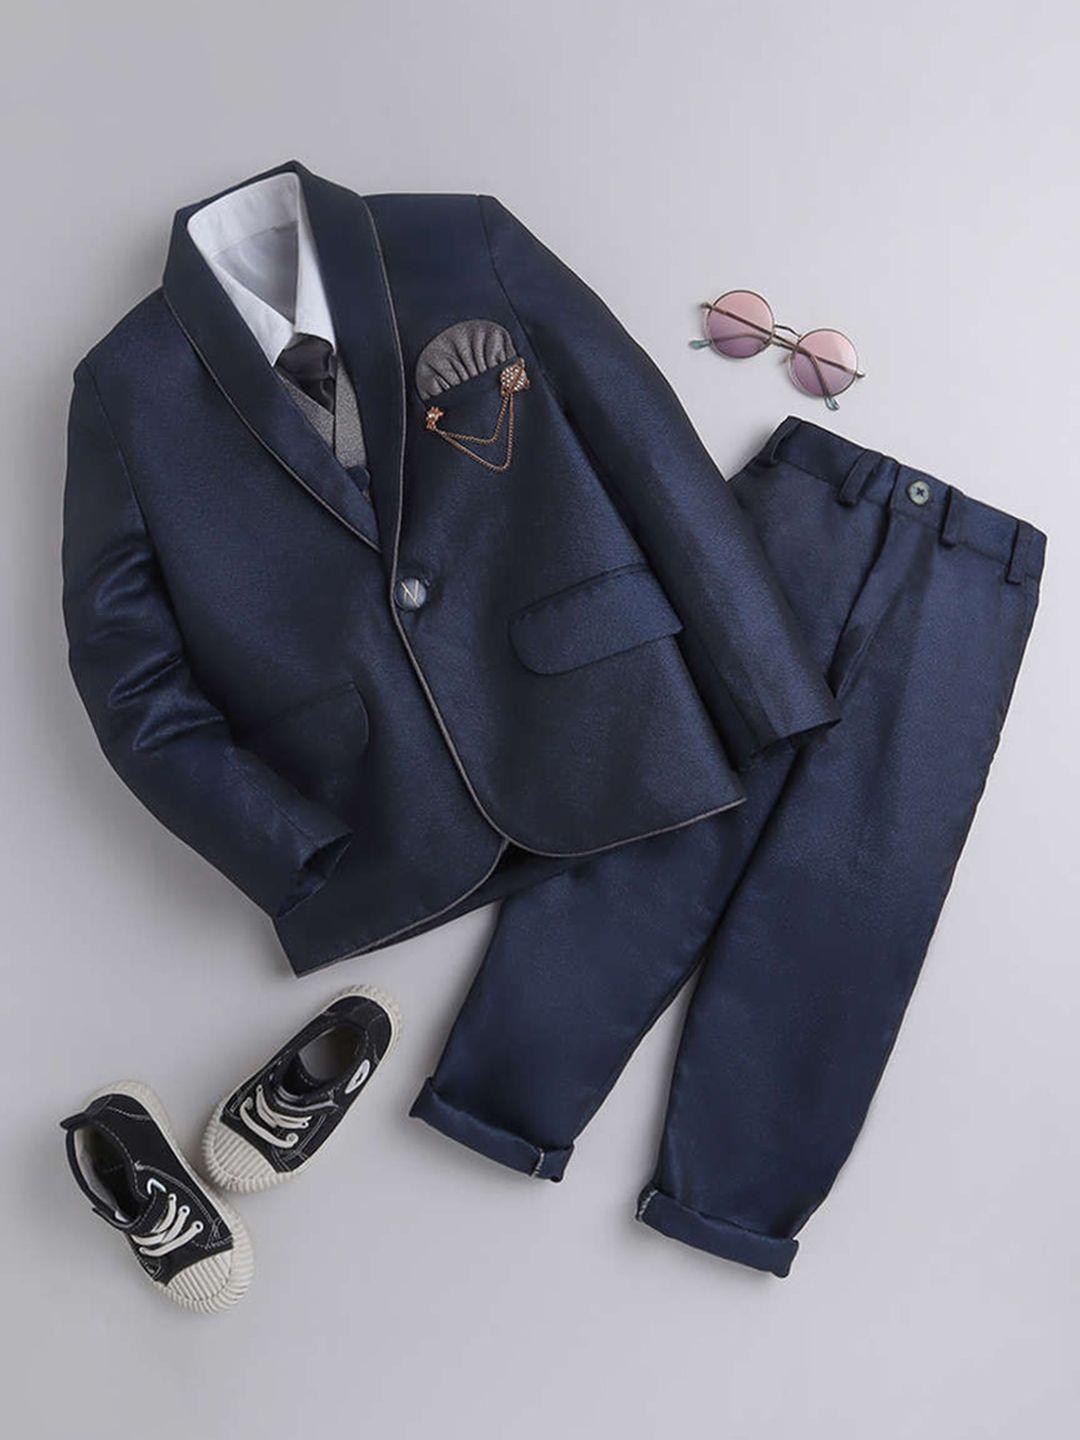 dkgf fashion boys single-breasted 5 piece suit